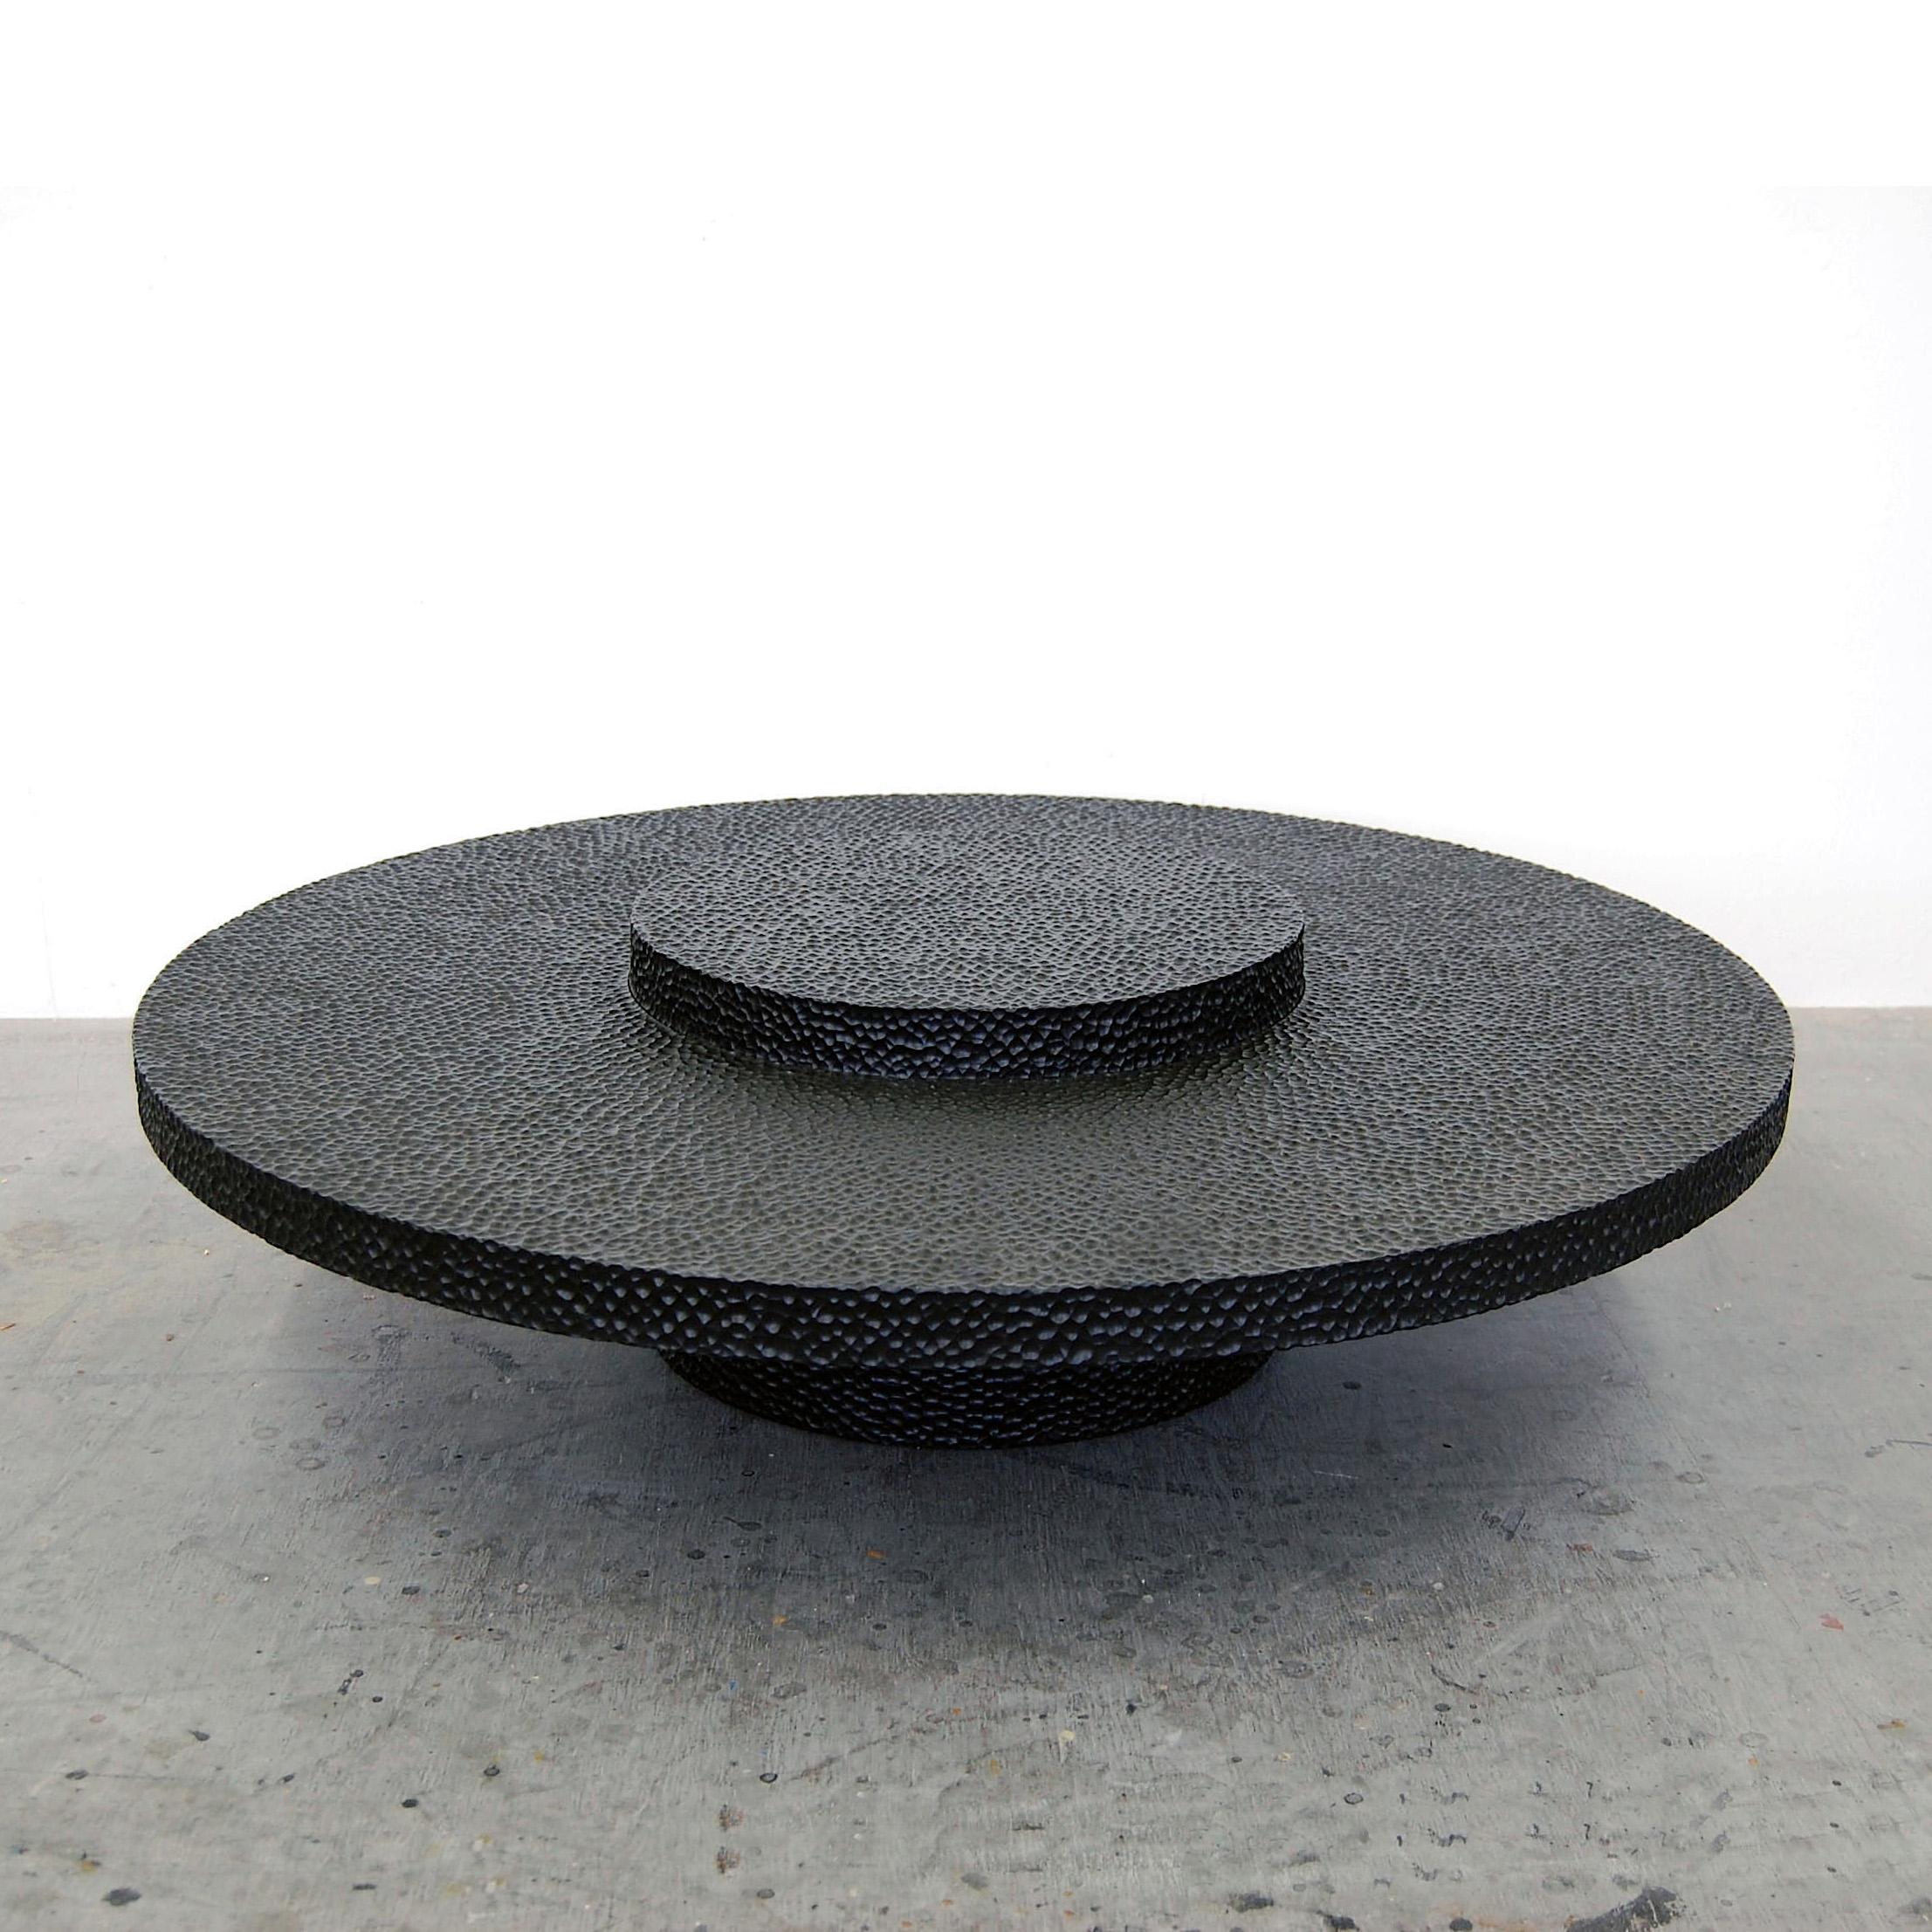 Maple round table sculpted by John Eric Byers
Dimensions: 33 x diameter 122 cm
Materials: carved blackened maple

All works are individually handmade to order.

John Eric Byers creates geometrically inspired pieces that are minimal, emotional,